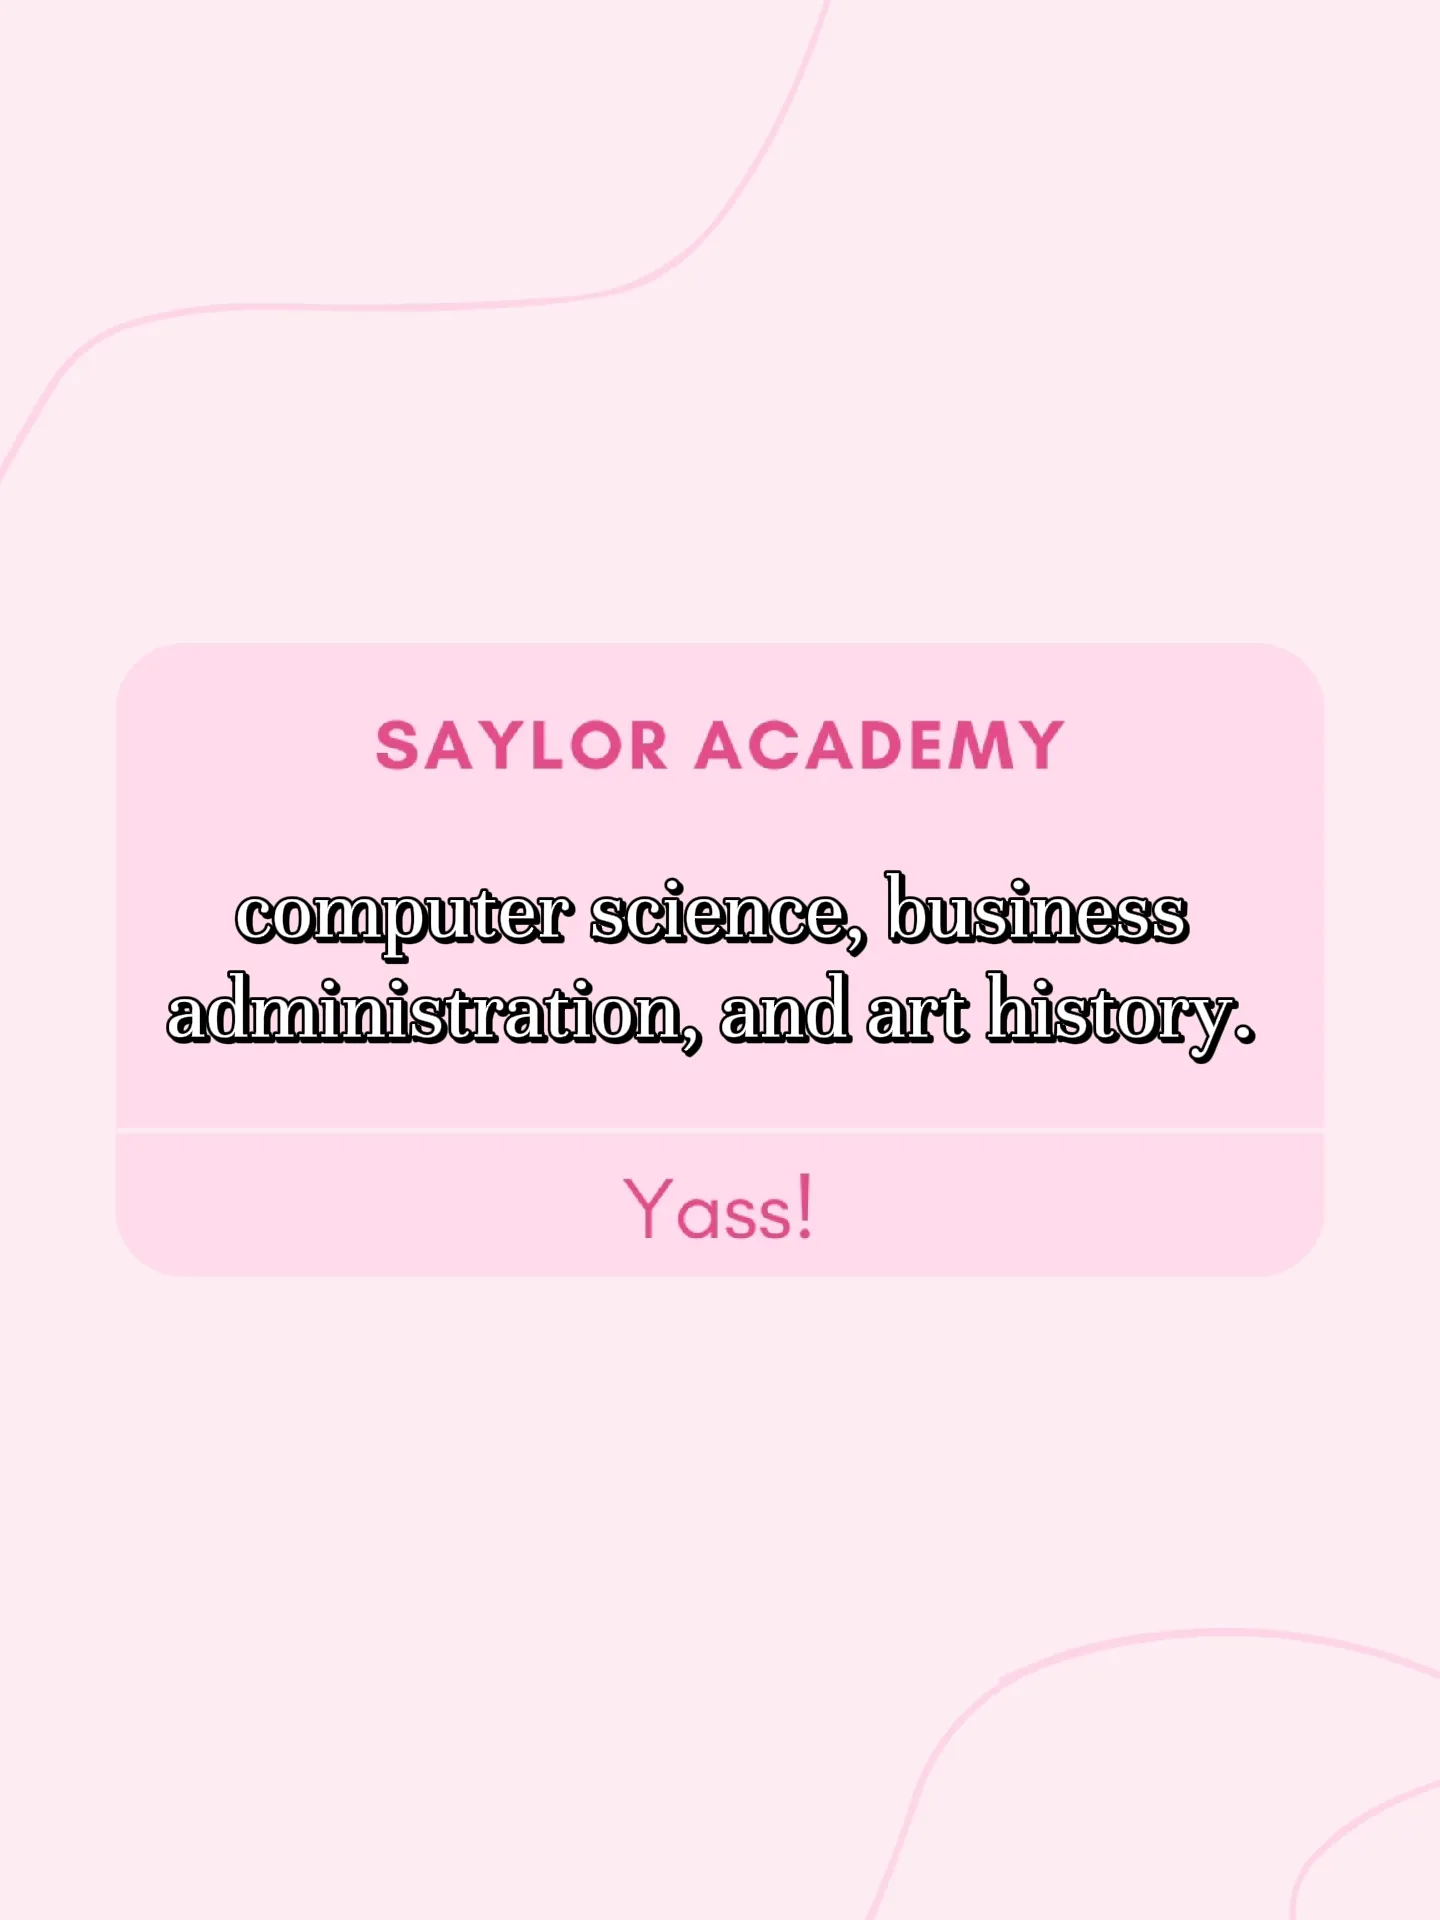  A pink background with white text that says "Saylor Academy".